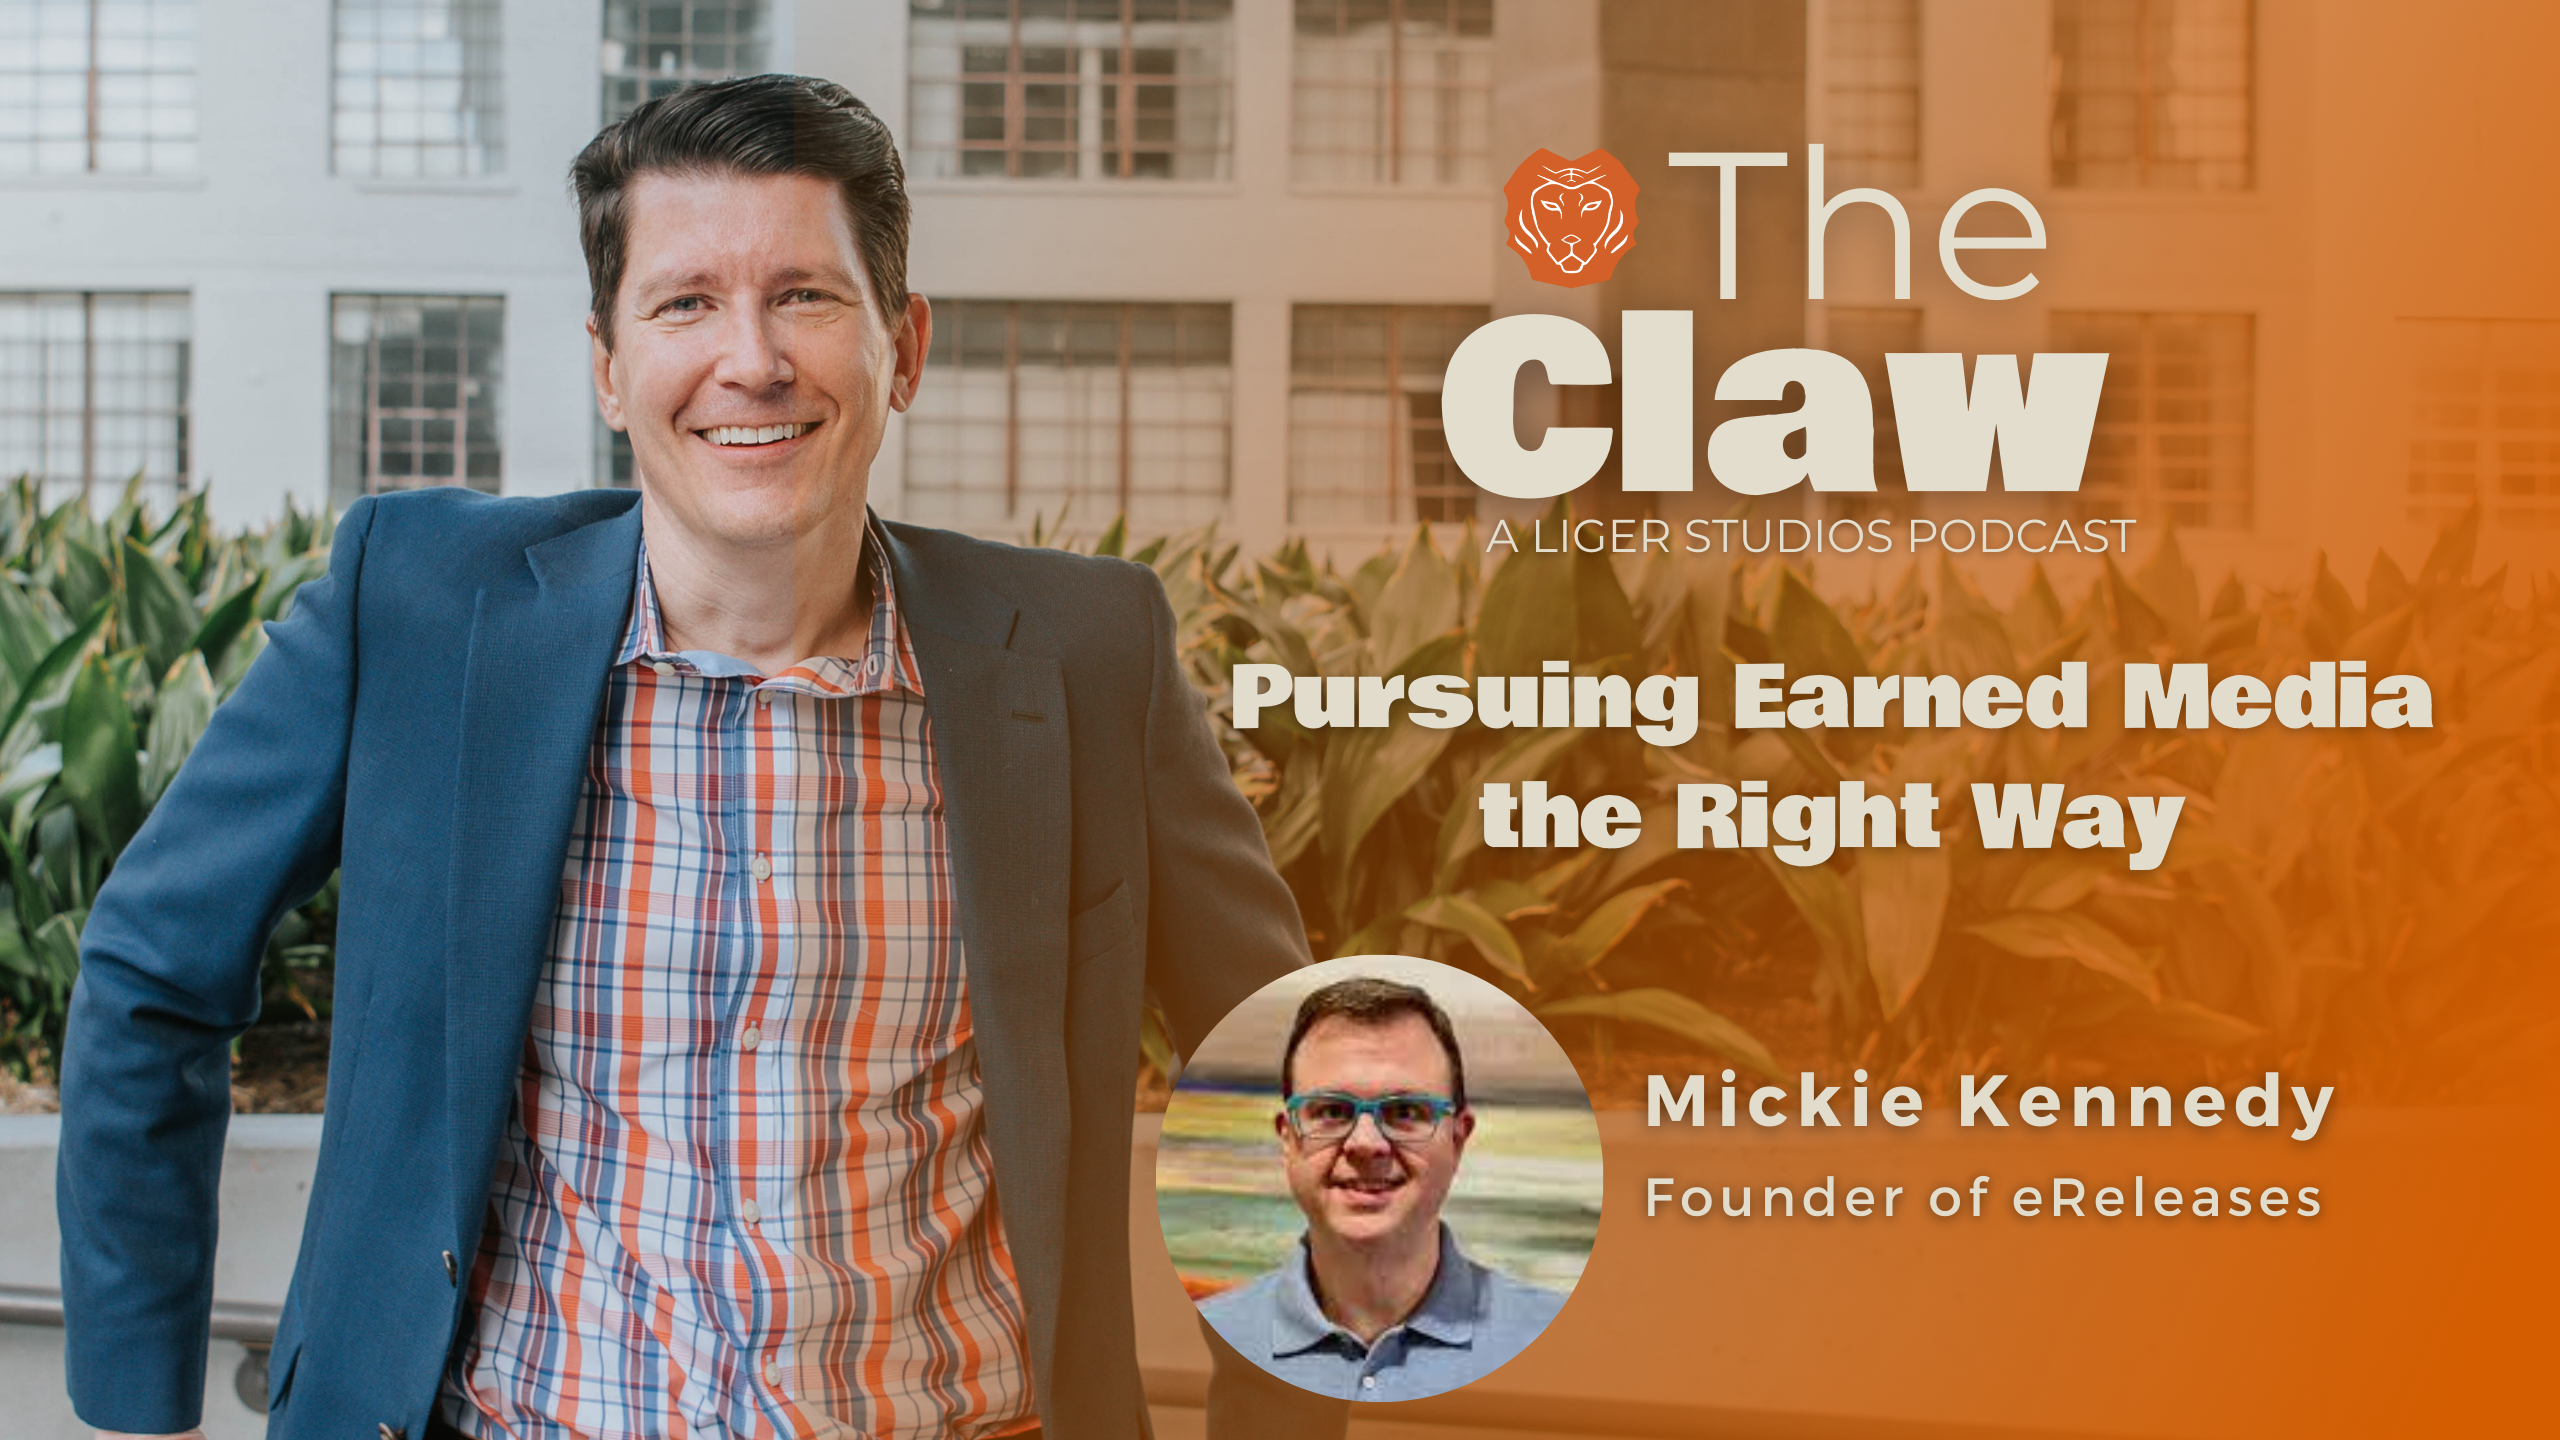 The Claw Podcast: Pursuing Earned Media the Right Way